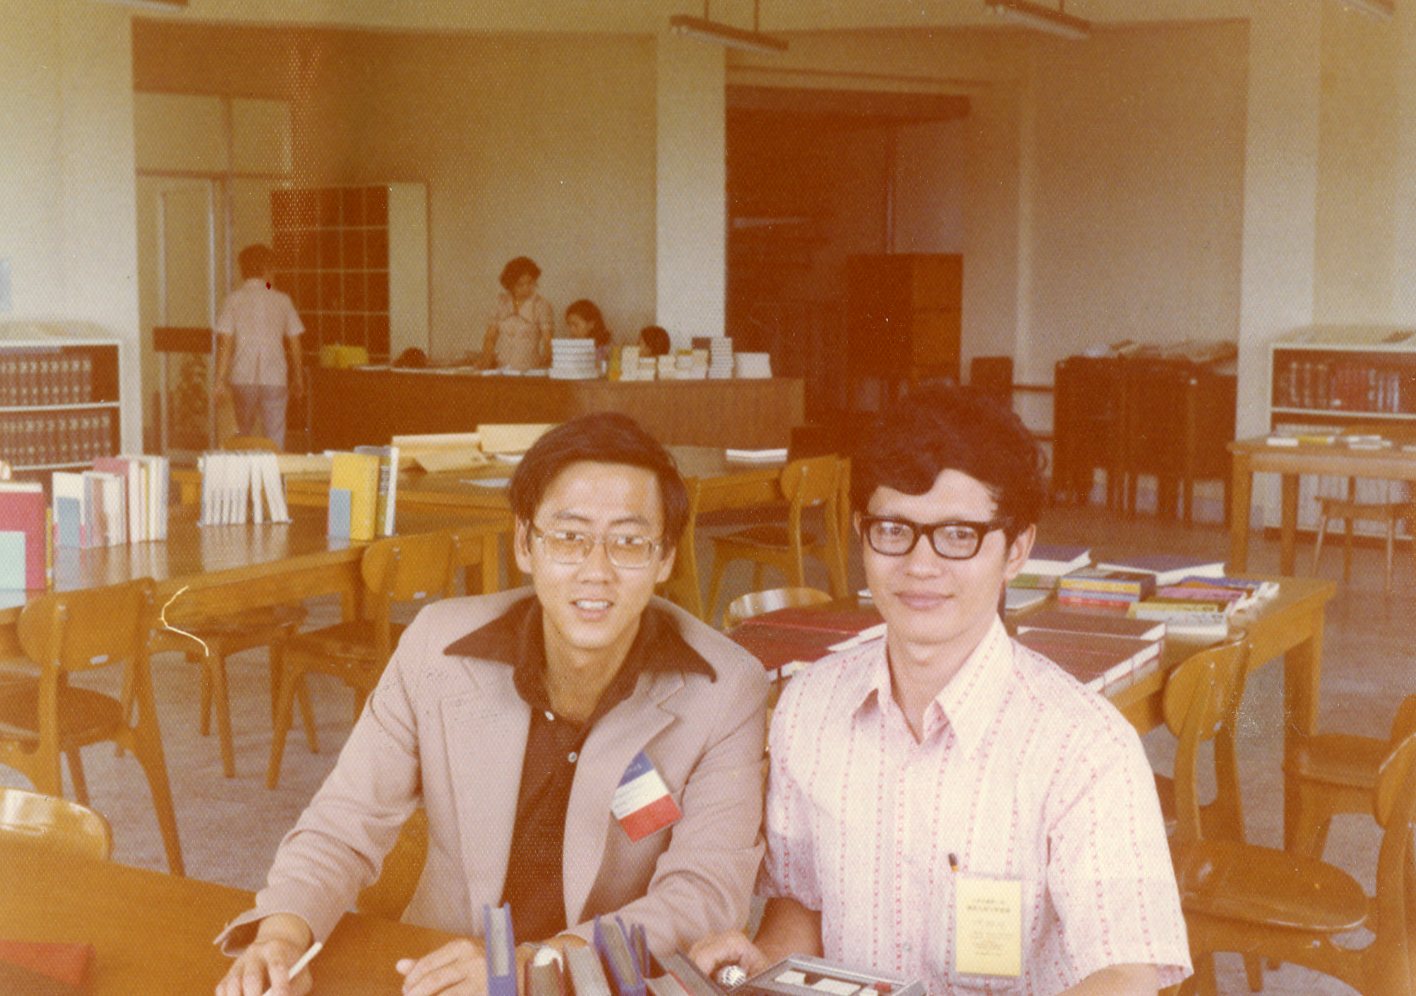 “Reflections on Diversity:” Highlights from the Eugene Chen Eoyang papers